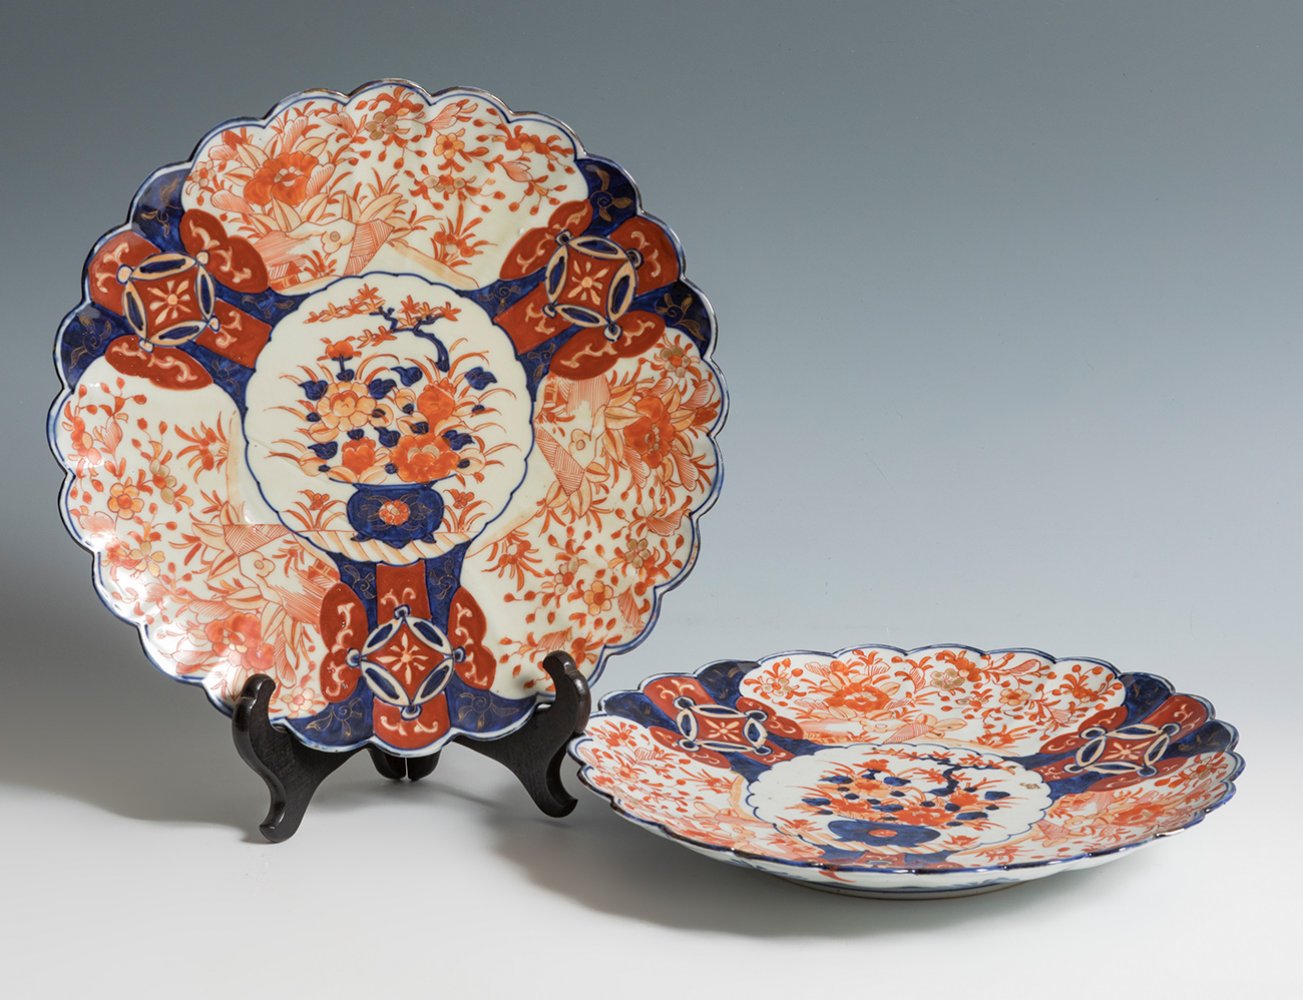 Two Imari-style dishes. Japan, 20th century.Glazed porcelain.Measurements: 30 cm in diameter.Pair of - Image 2 of 3